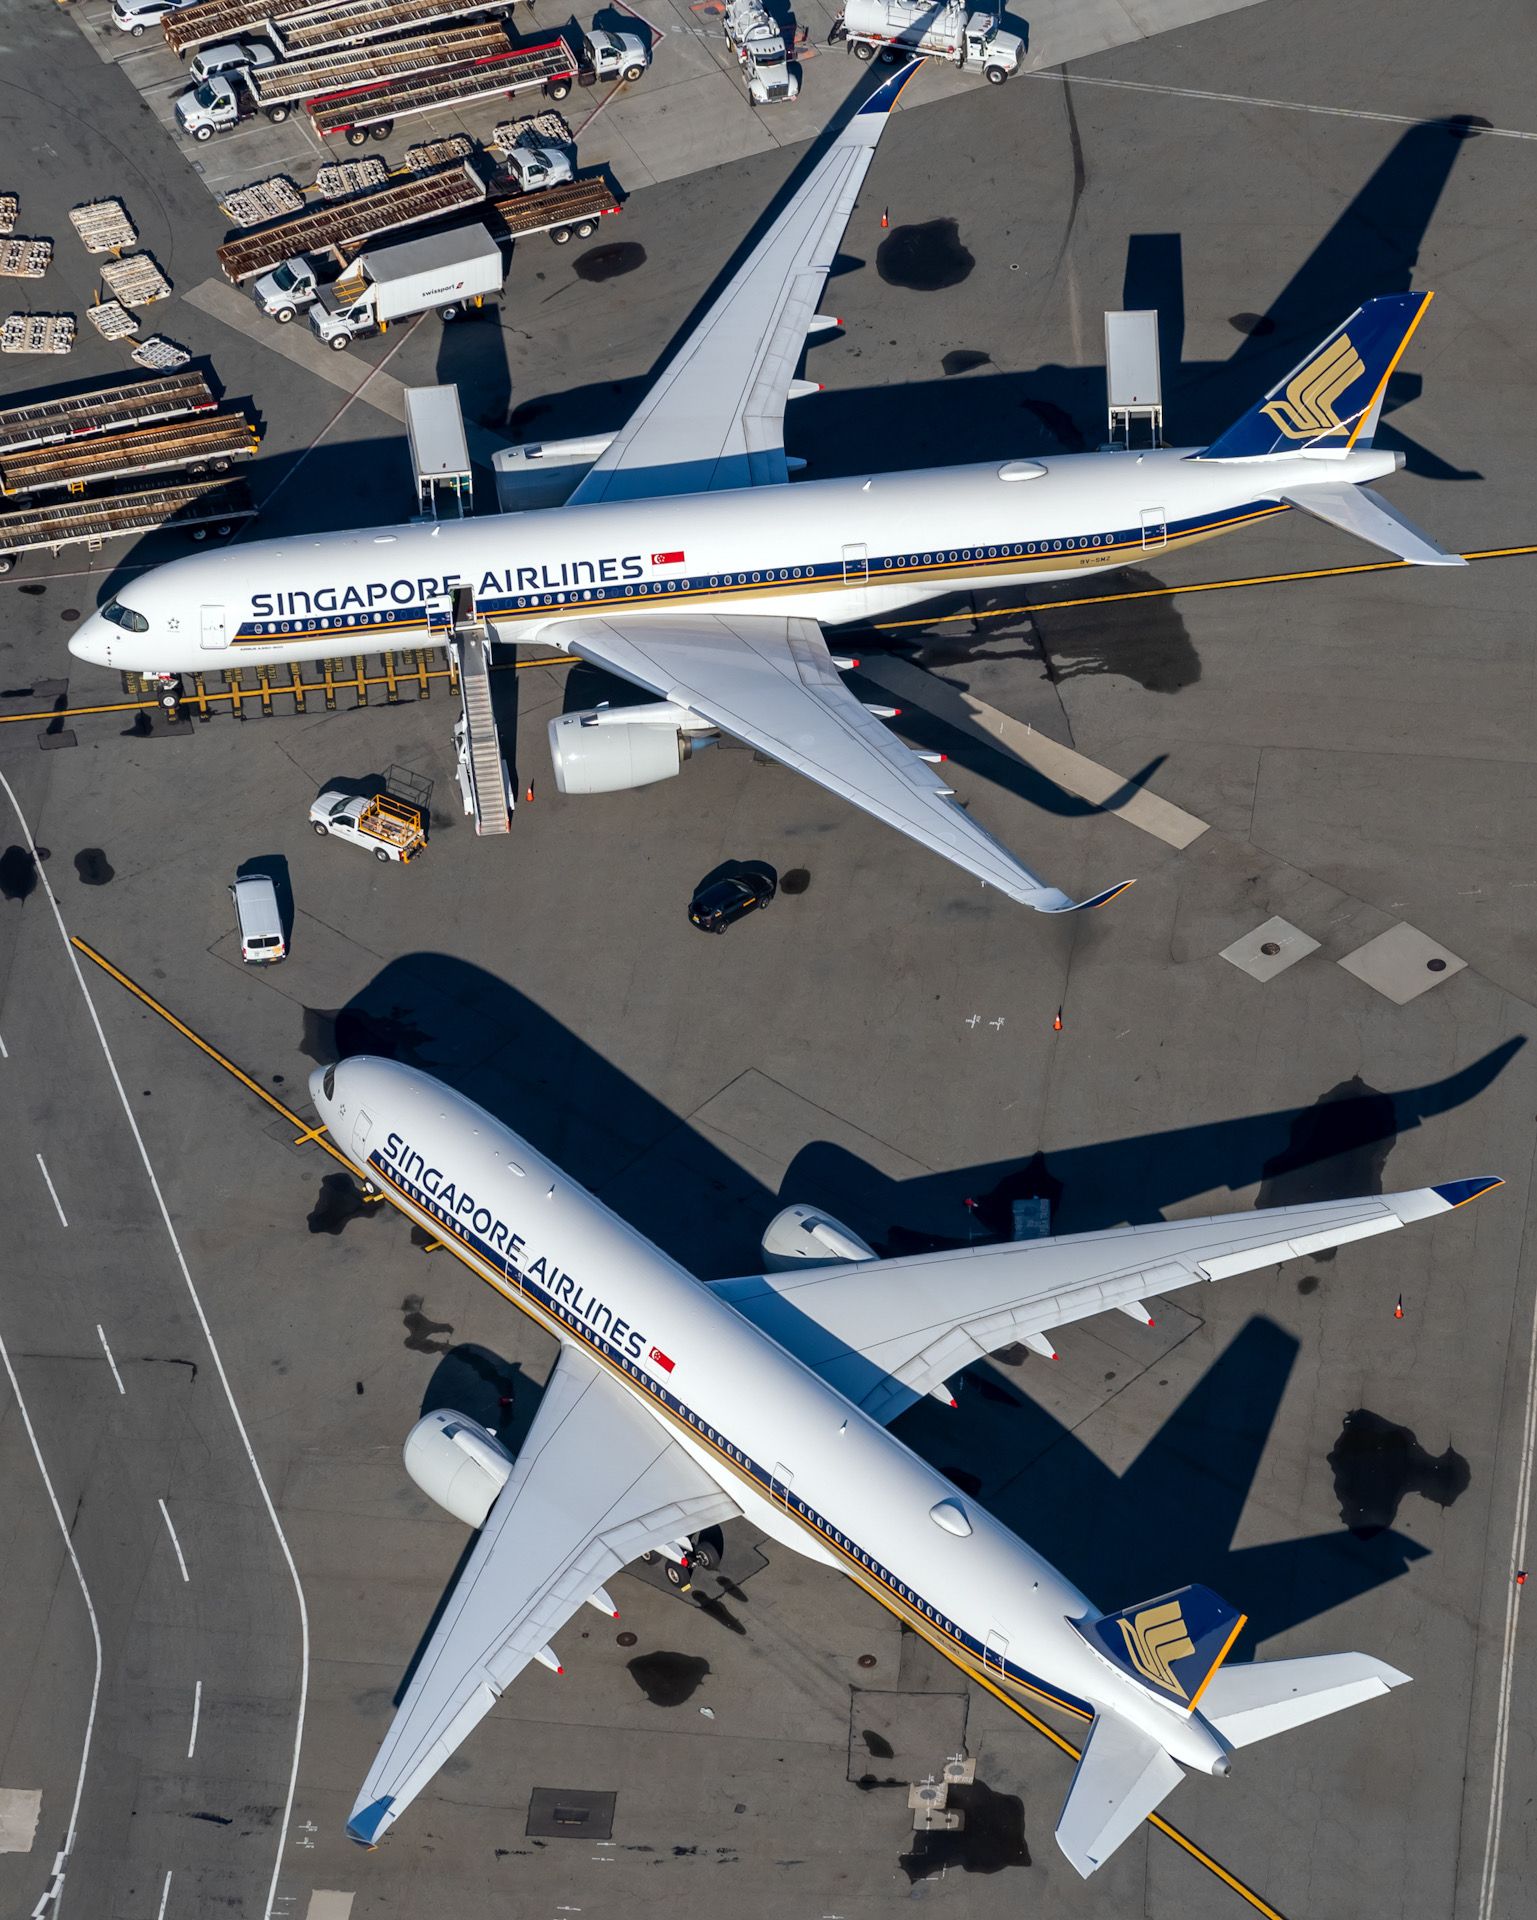 Two Singapore Airlines Airbus A350s parked at an airport.